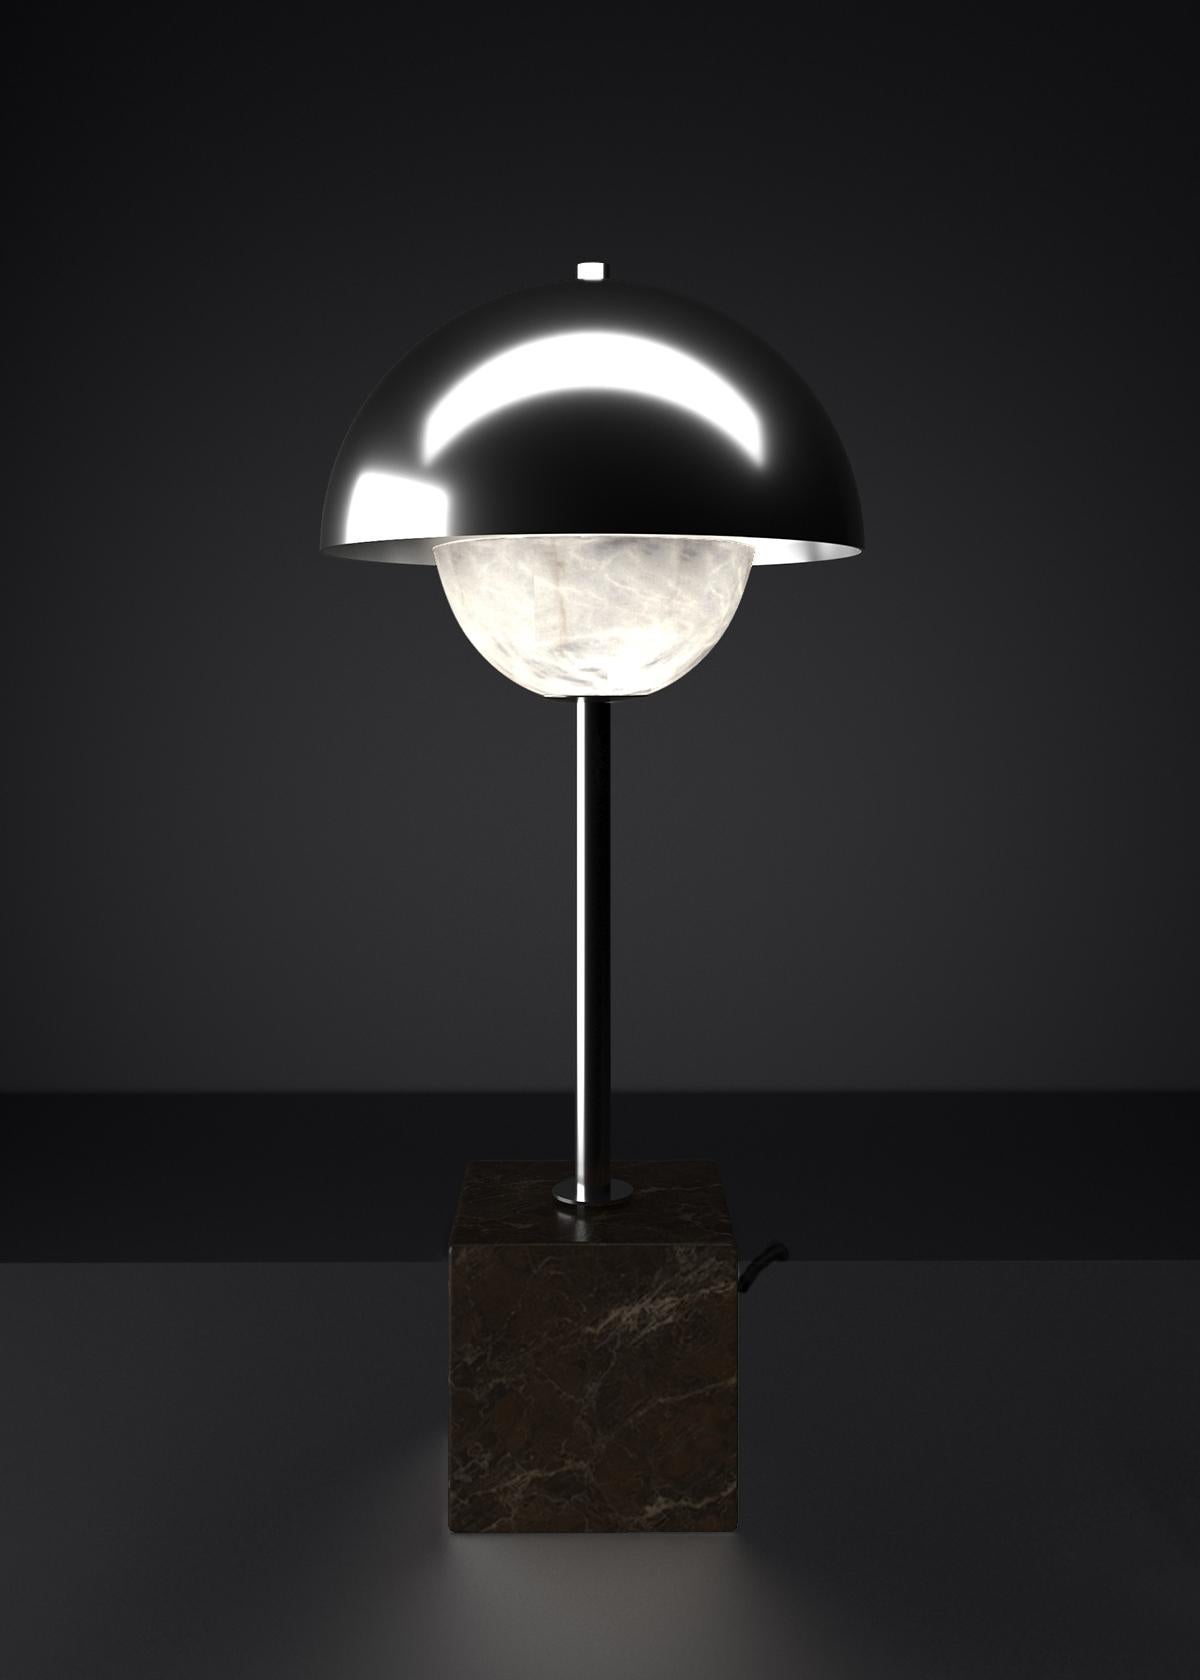 Apollo Shiny Silver Metal Table Lamp by Alabastro Italiano
Dimensions: D 30 x W 30 x H 74 cm.
Materials: White alabaster, Nero Marquinia marble, black silk cables and metal.

Available in different finishes: Shiny Silver, Bronze, Brushed Brass,